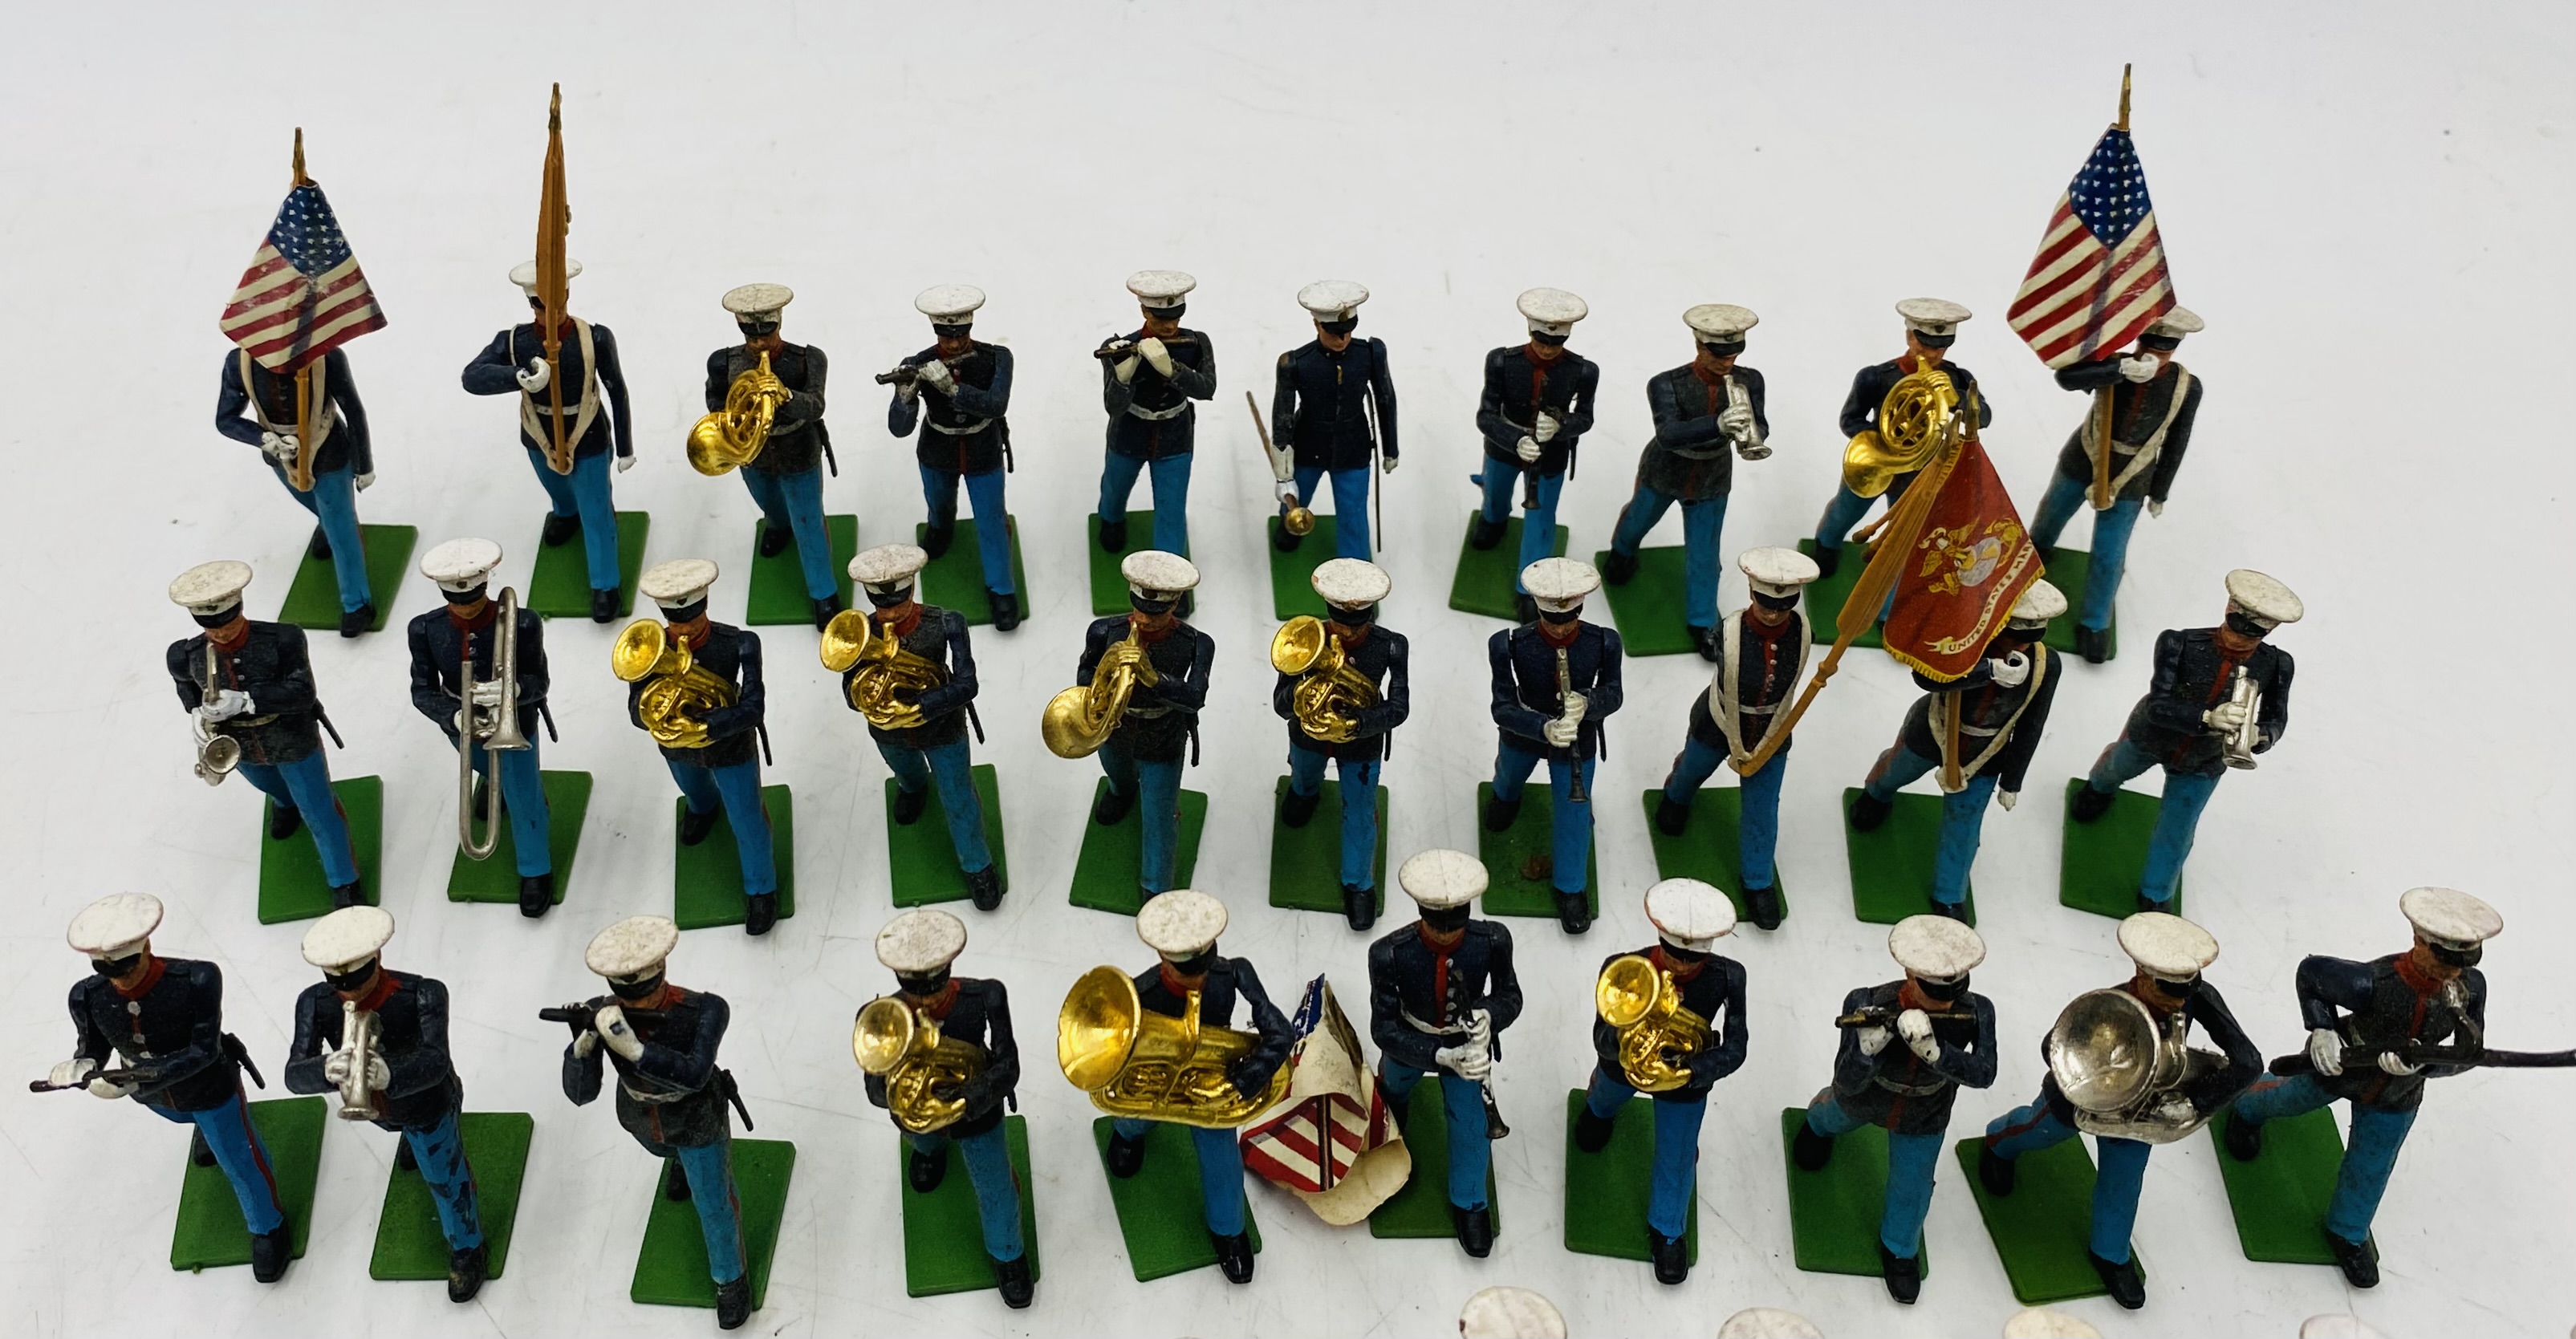 A collection of vintage Britains United States Marine Corps Military Marching Band figurines - - Image 2 of 5